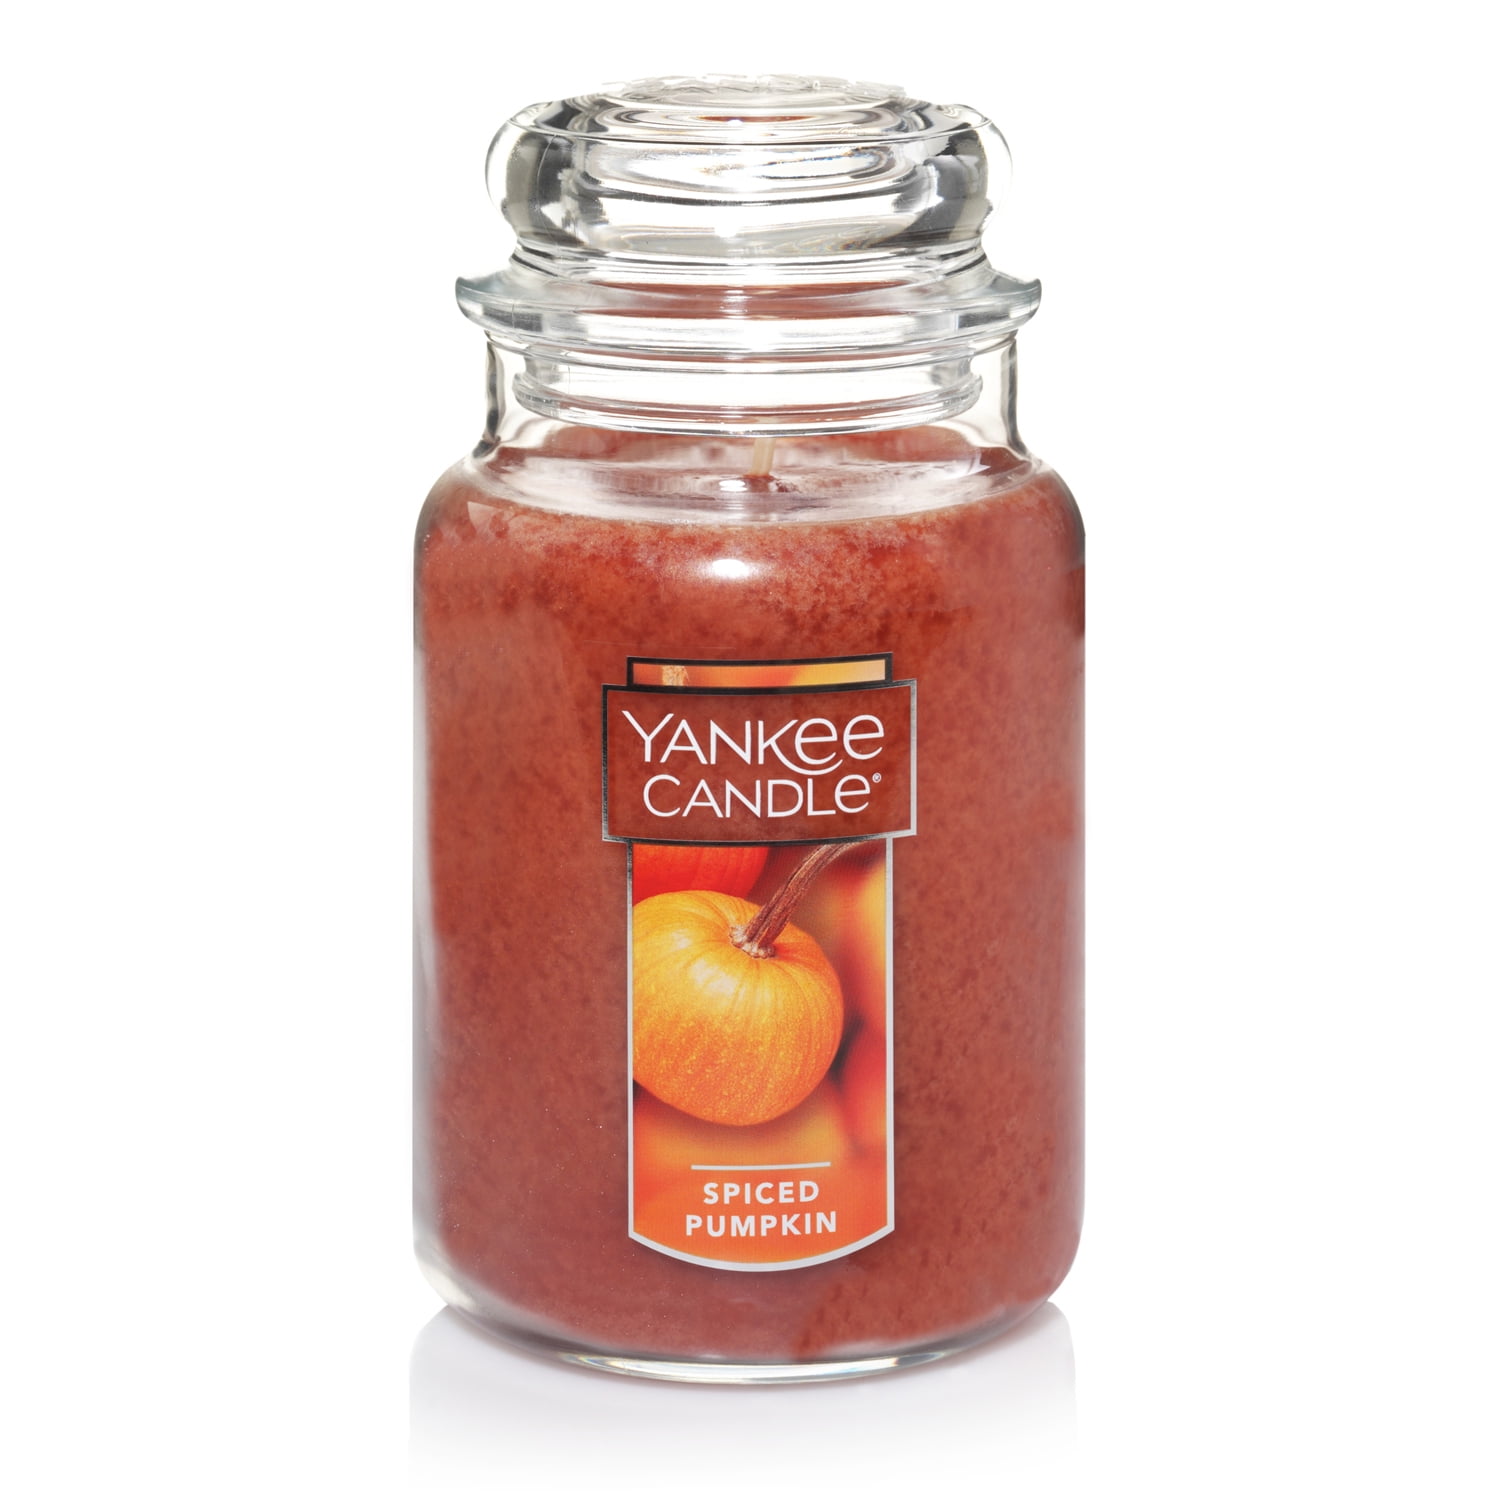 Yankee Candle Original Large Jar Scented Candle 22 oz Candles Gift For Home 